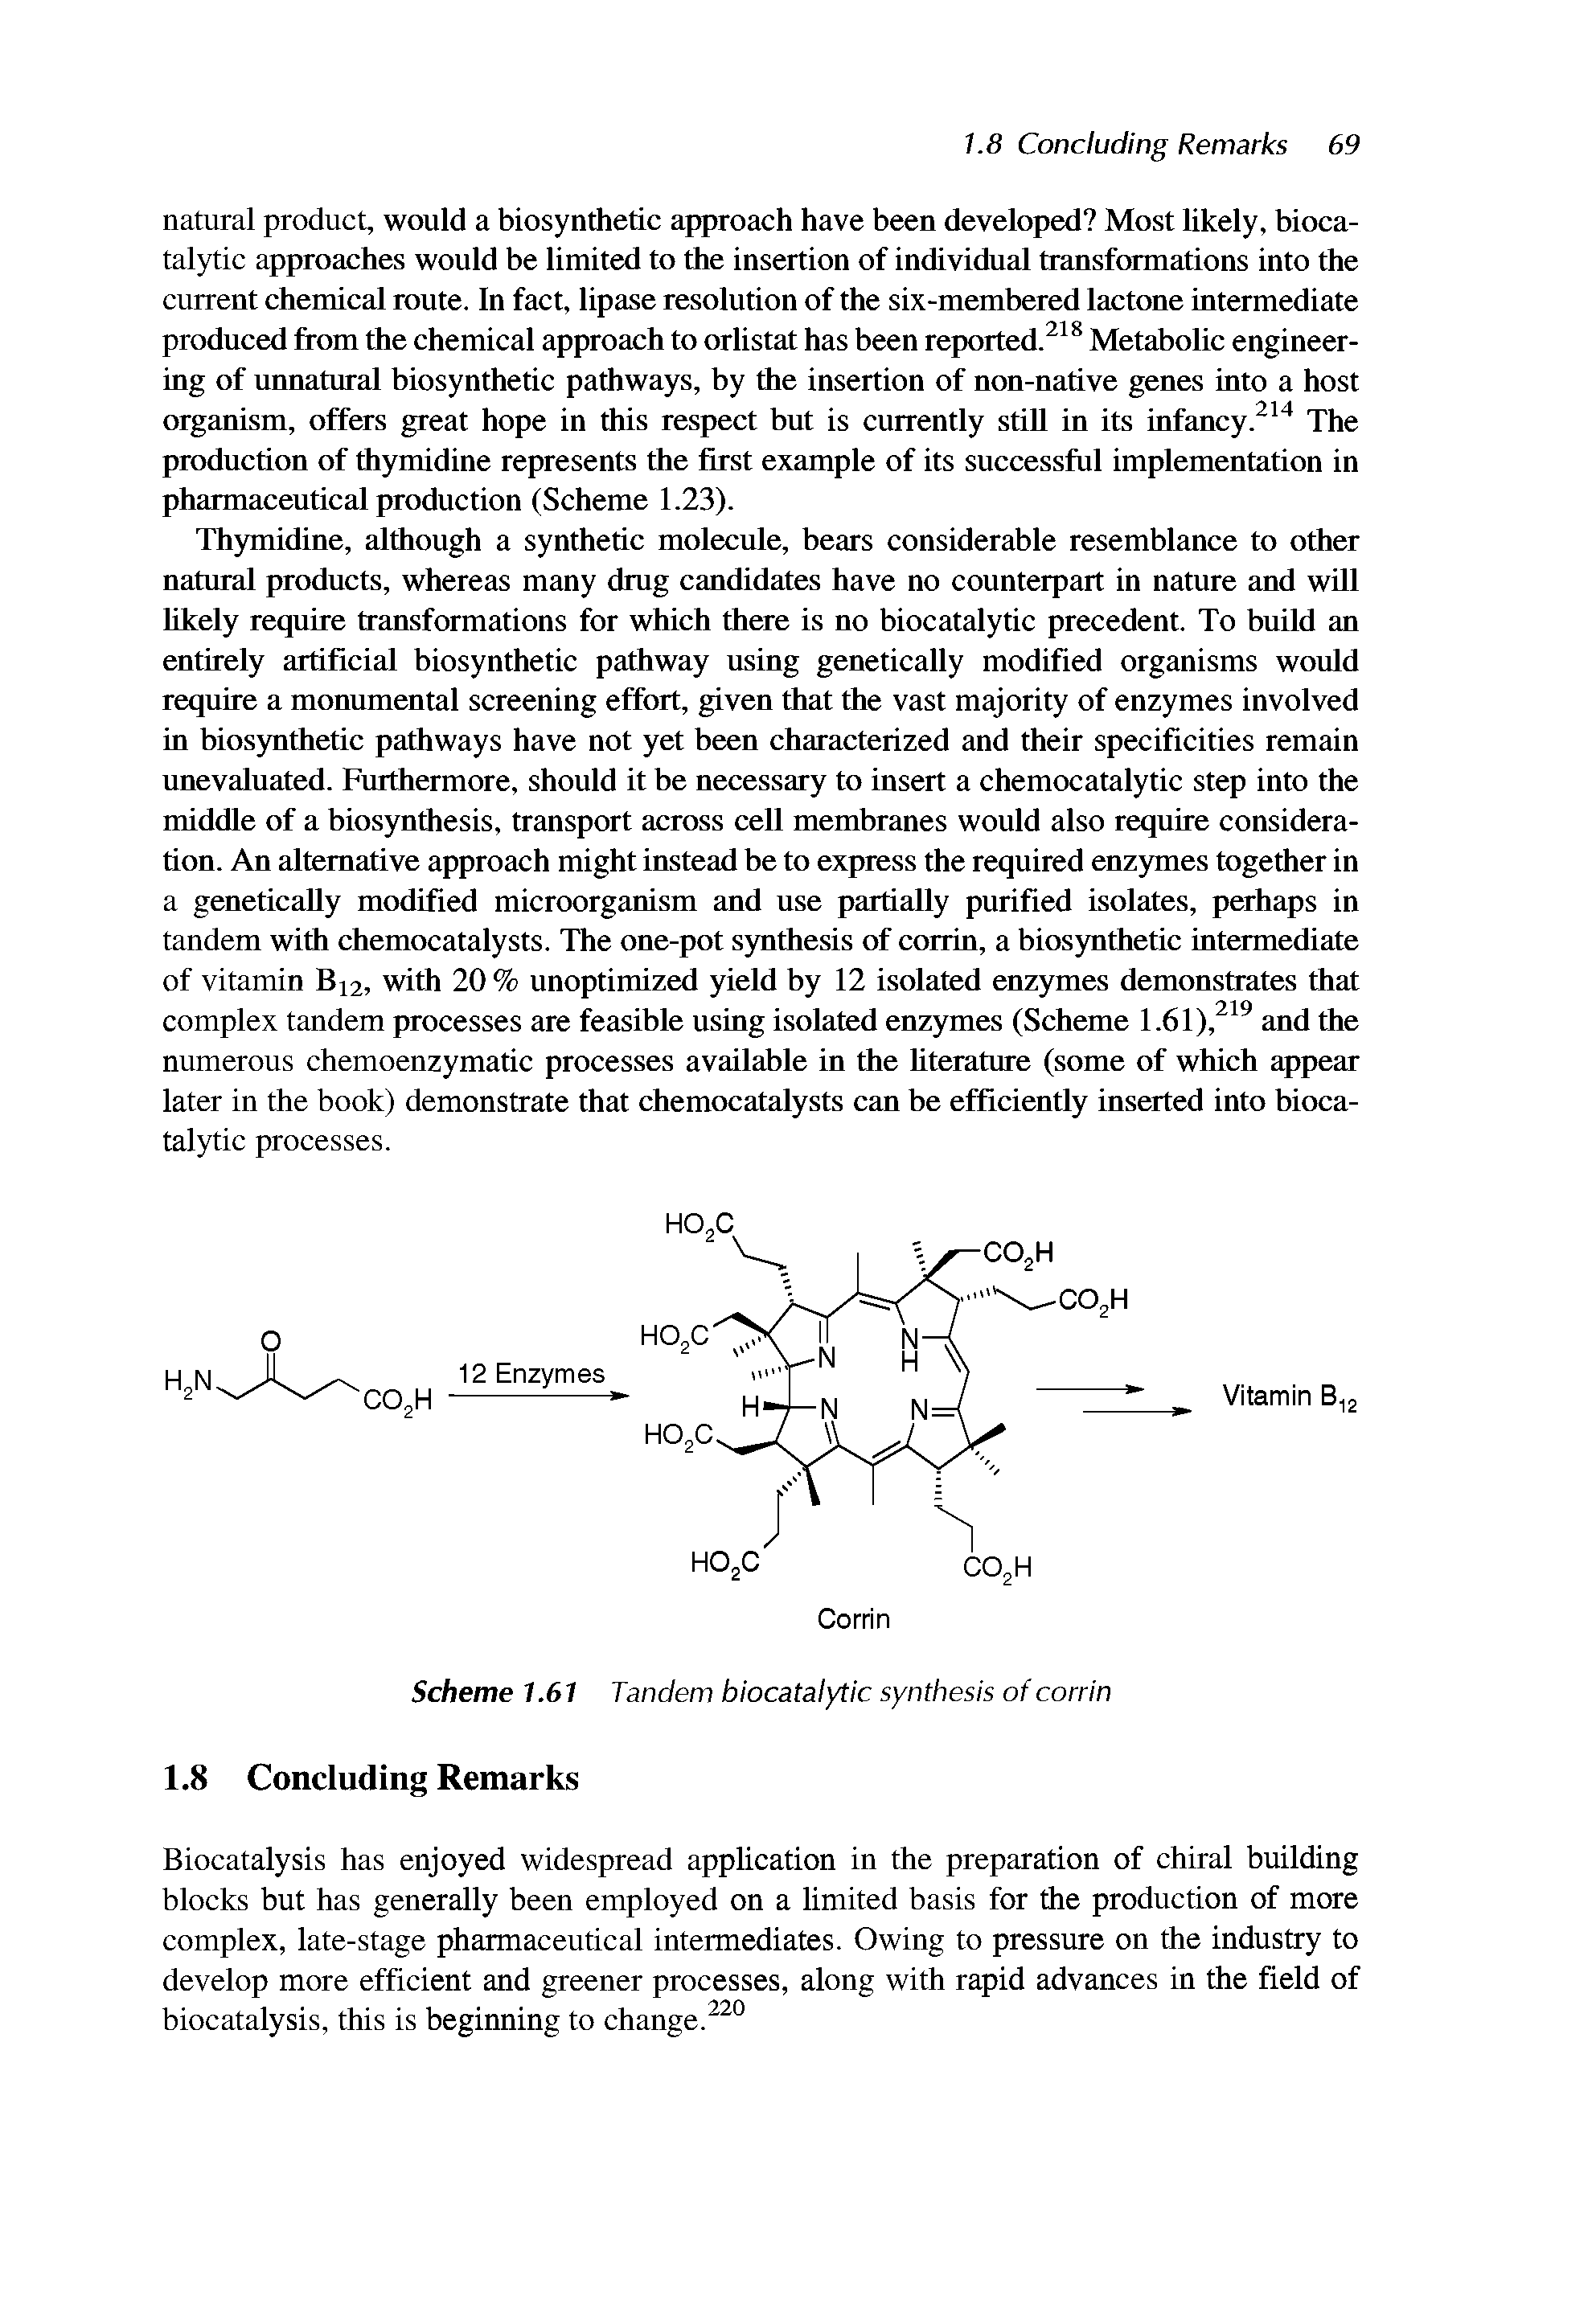 Scheme 1.61 Tandem biocatalytic synthesis of corrin 1.8 Concluding Remarks...